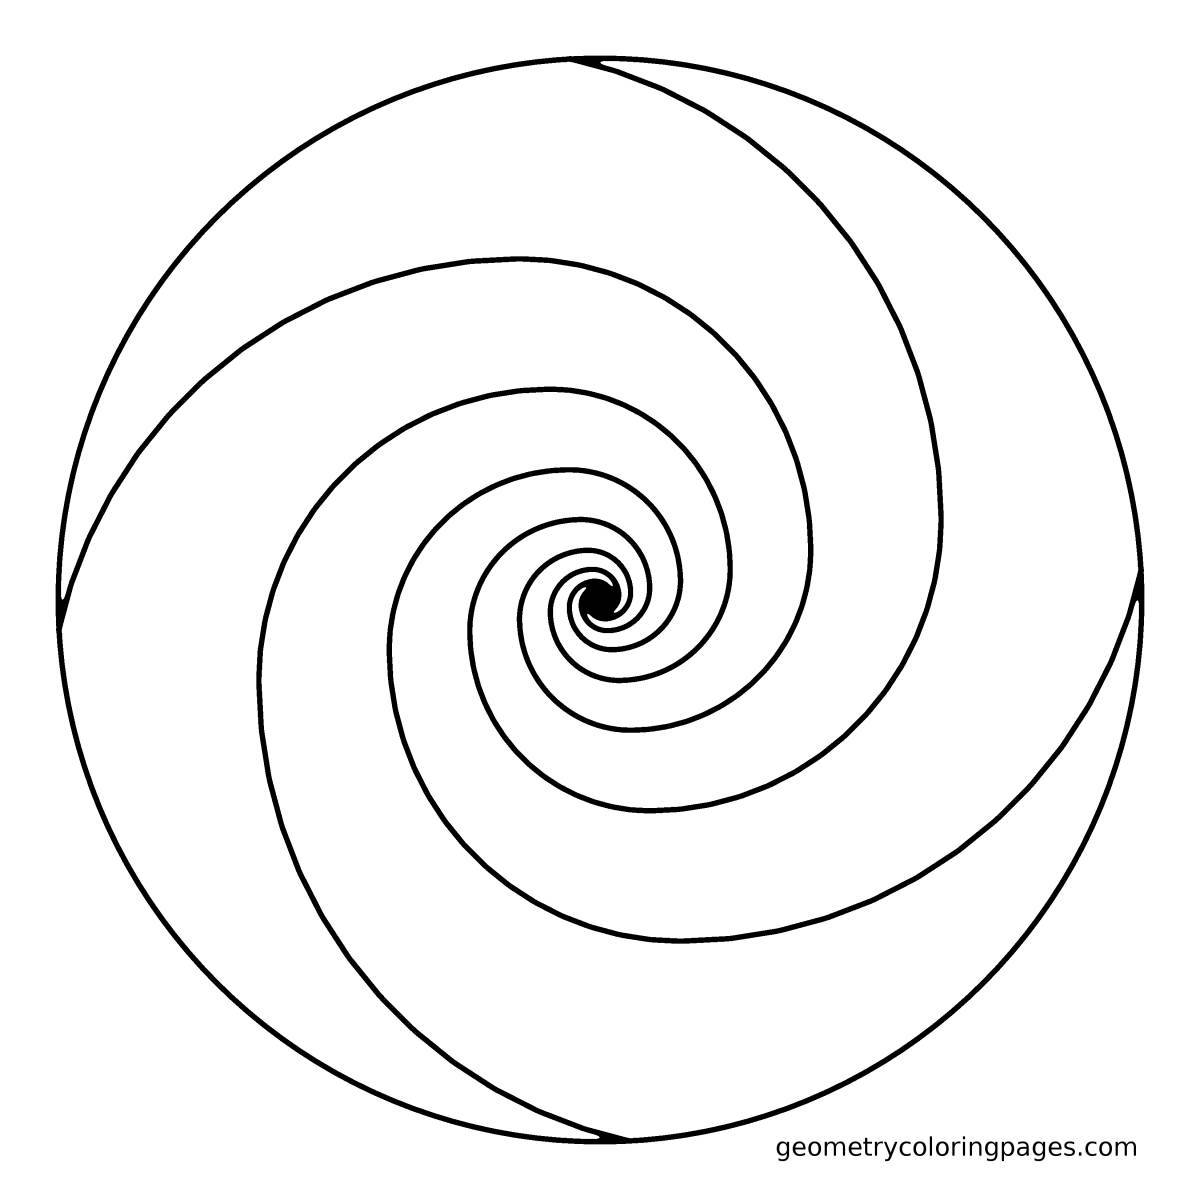 Create spiral coloring #3